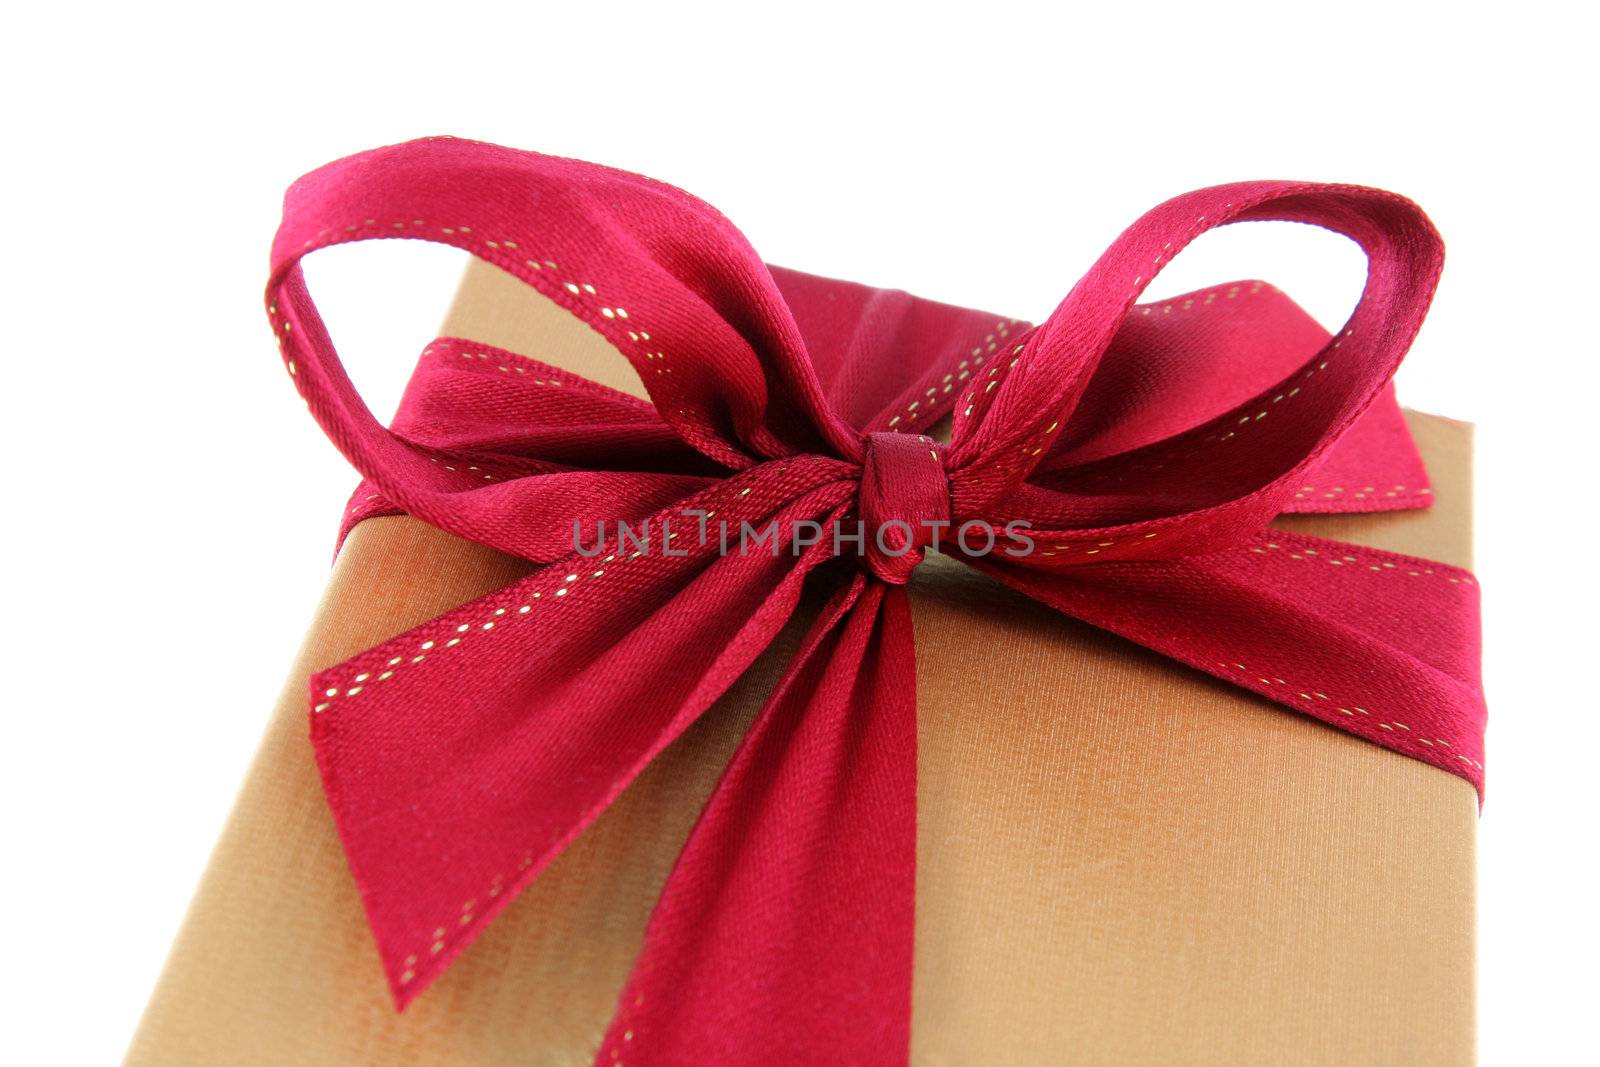 Red Bow Xmas Gift
 by ca2hill